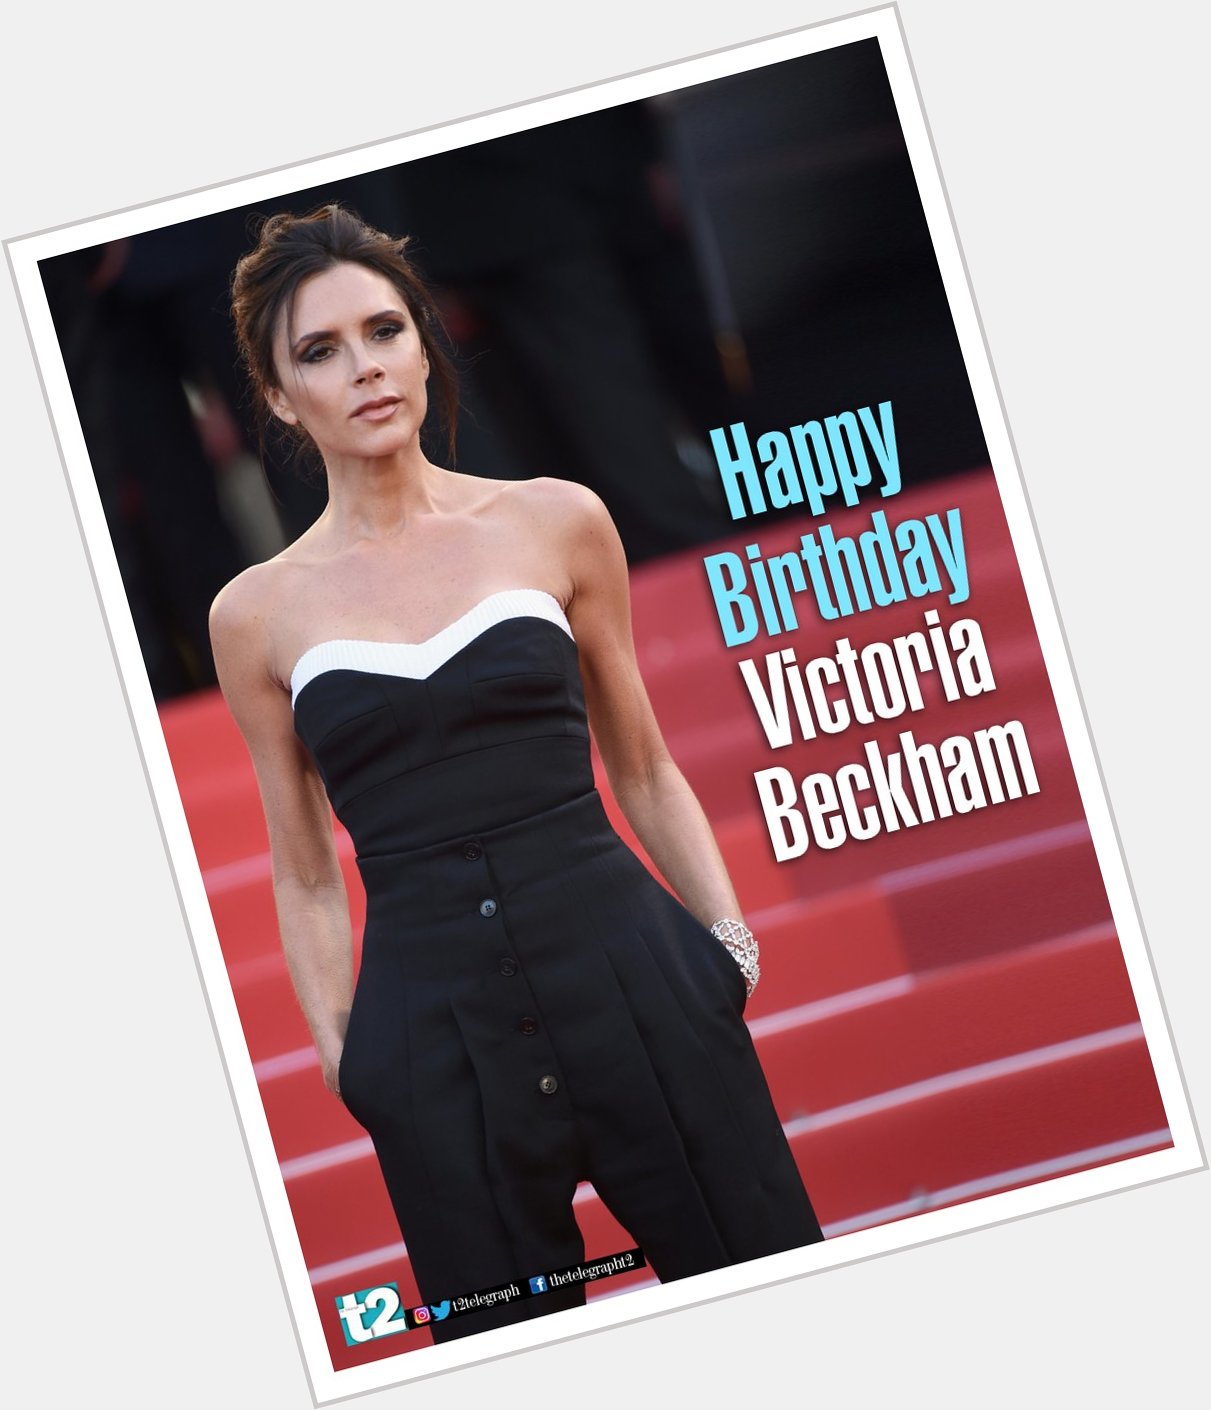 Former Spice Girl. Glam style diva. One half of a super couple. Happy birthday Victoria Beckham. 